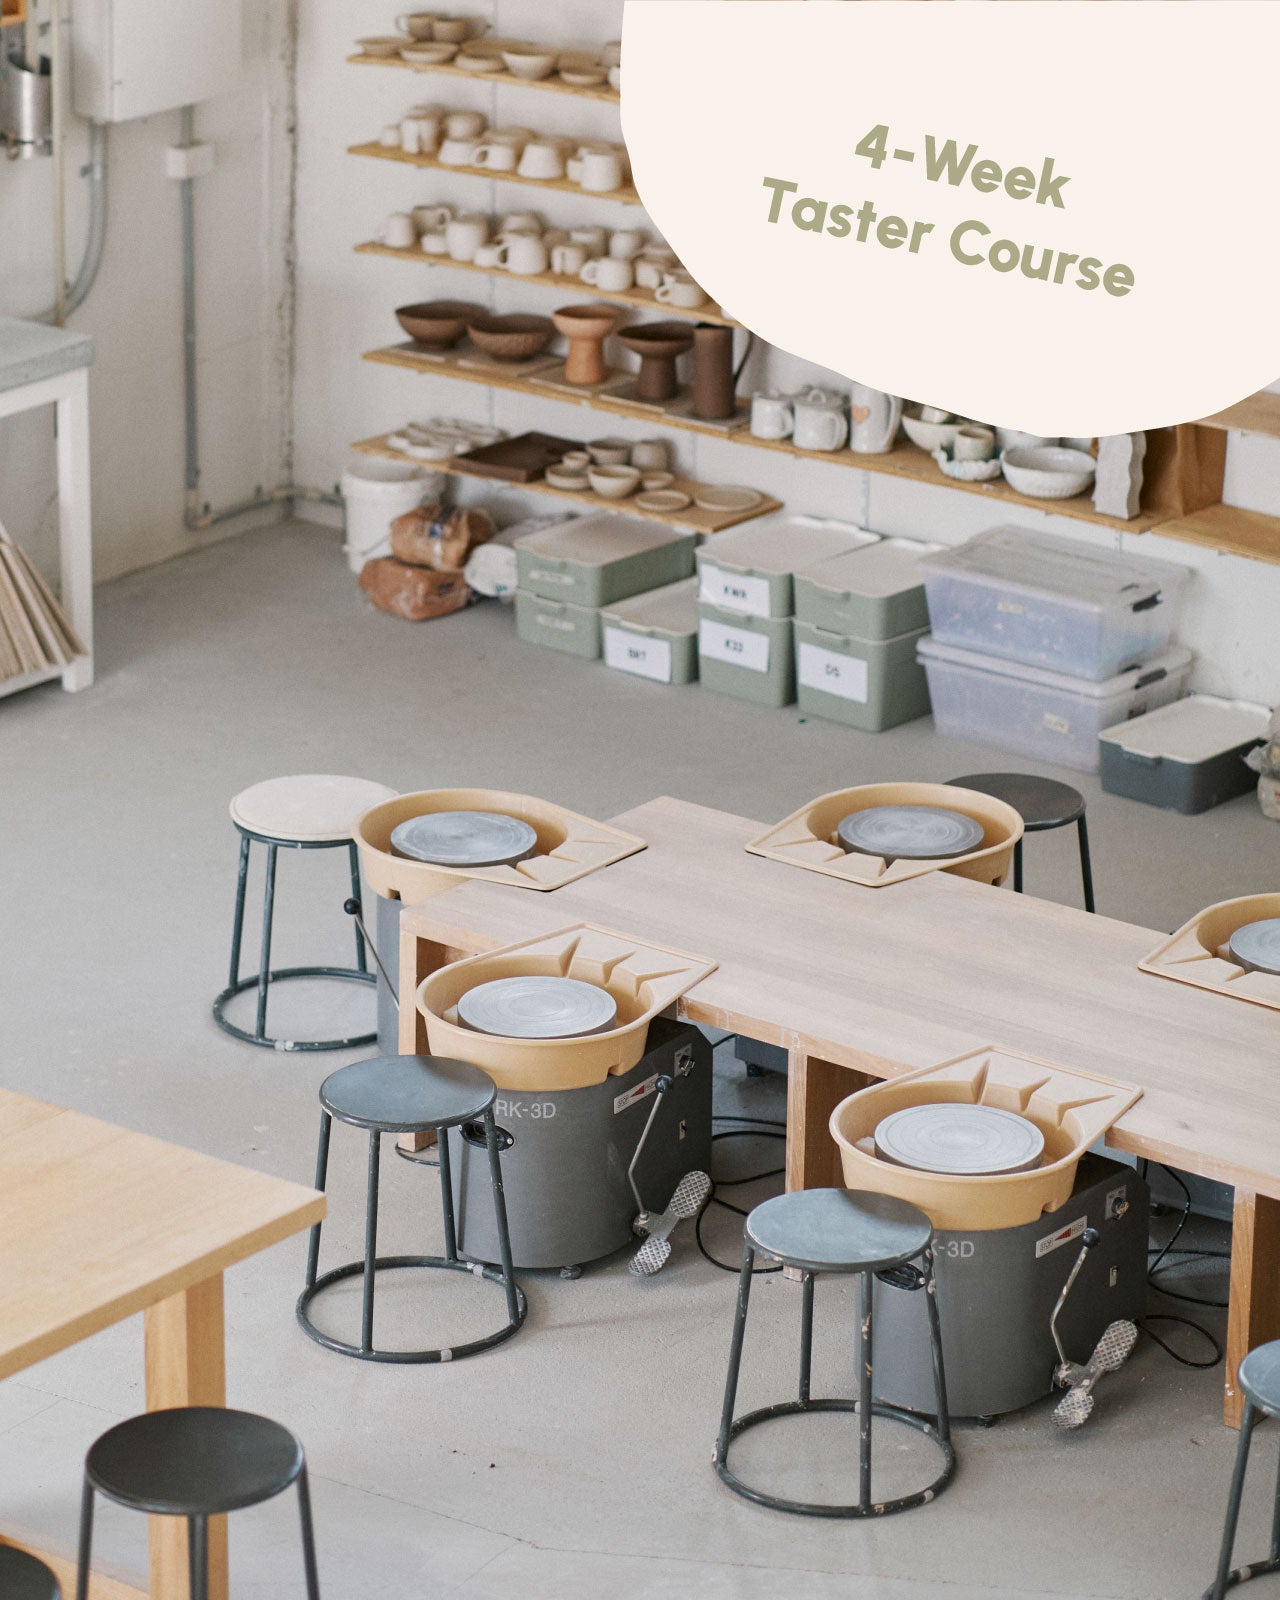 Intro to Pottery Taster Course (4 Weeks)